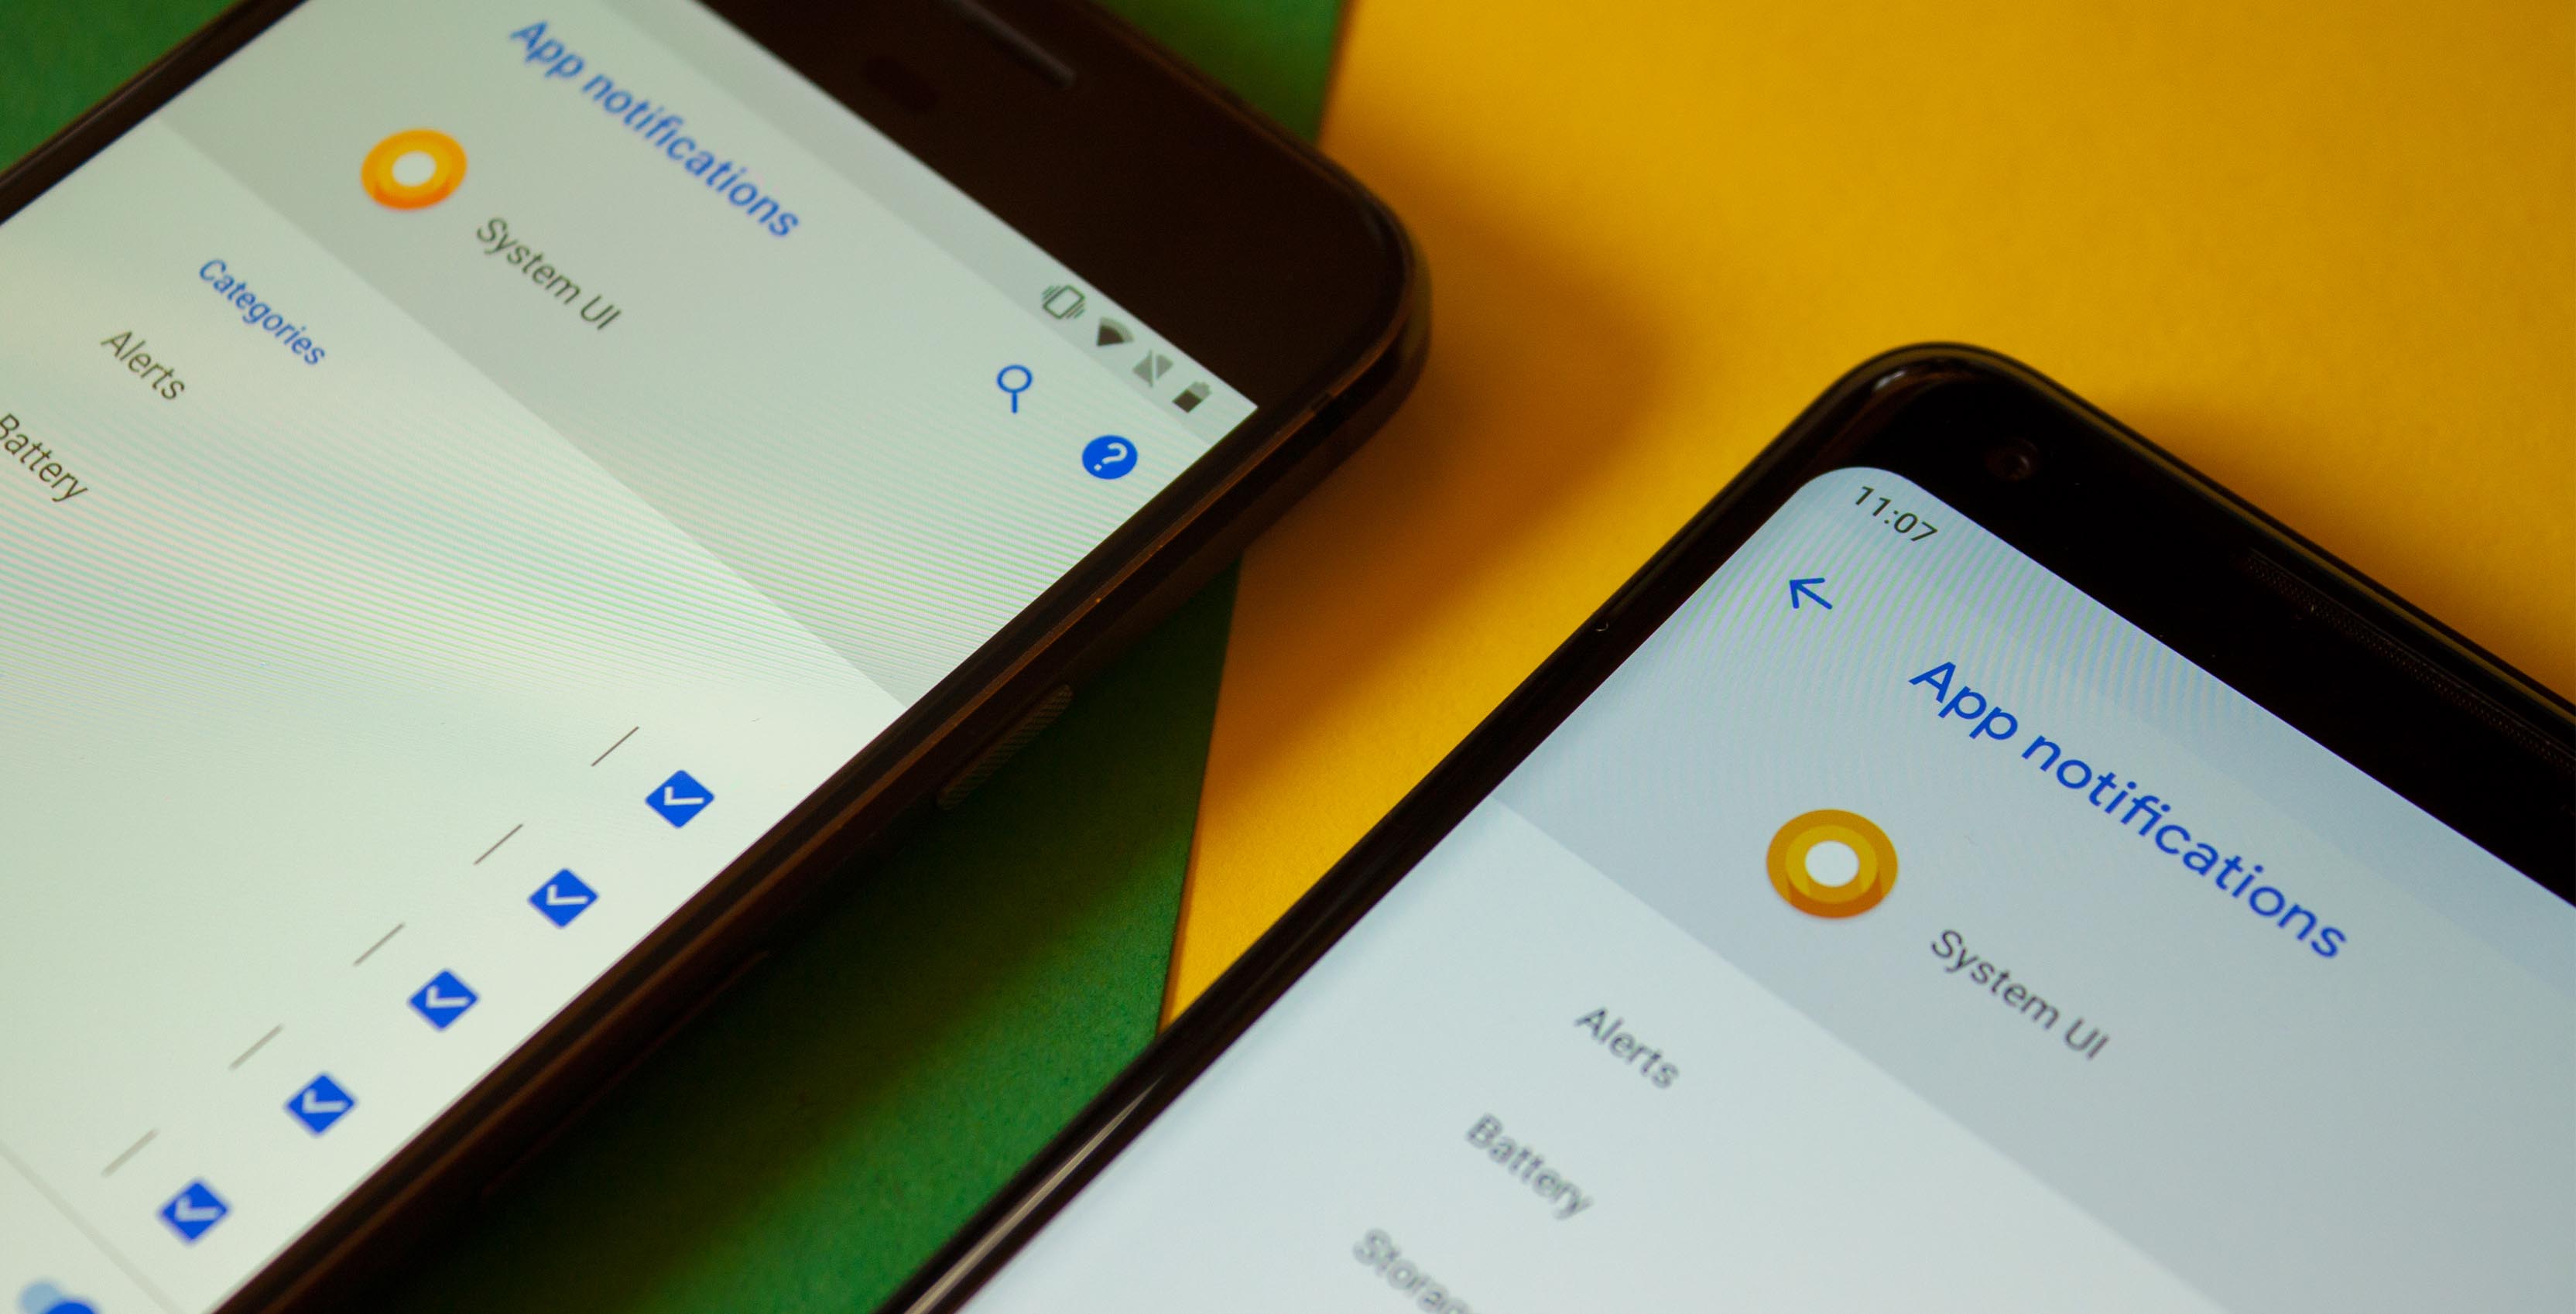 System UI notification settings on Android P